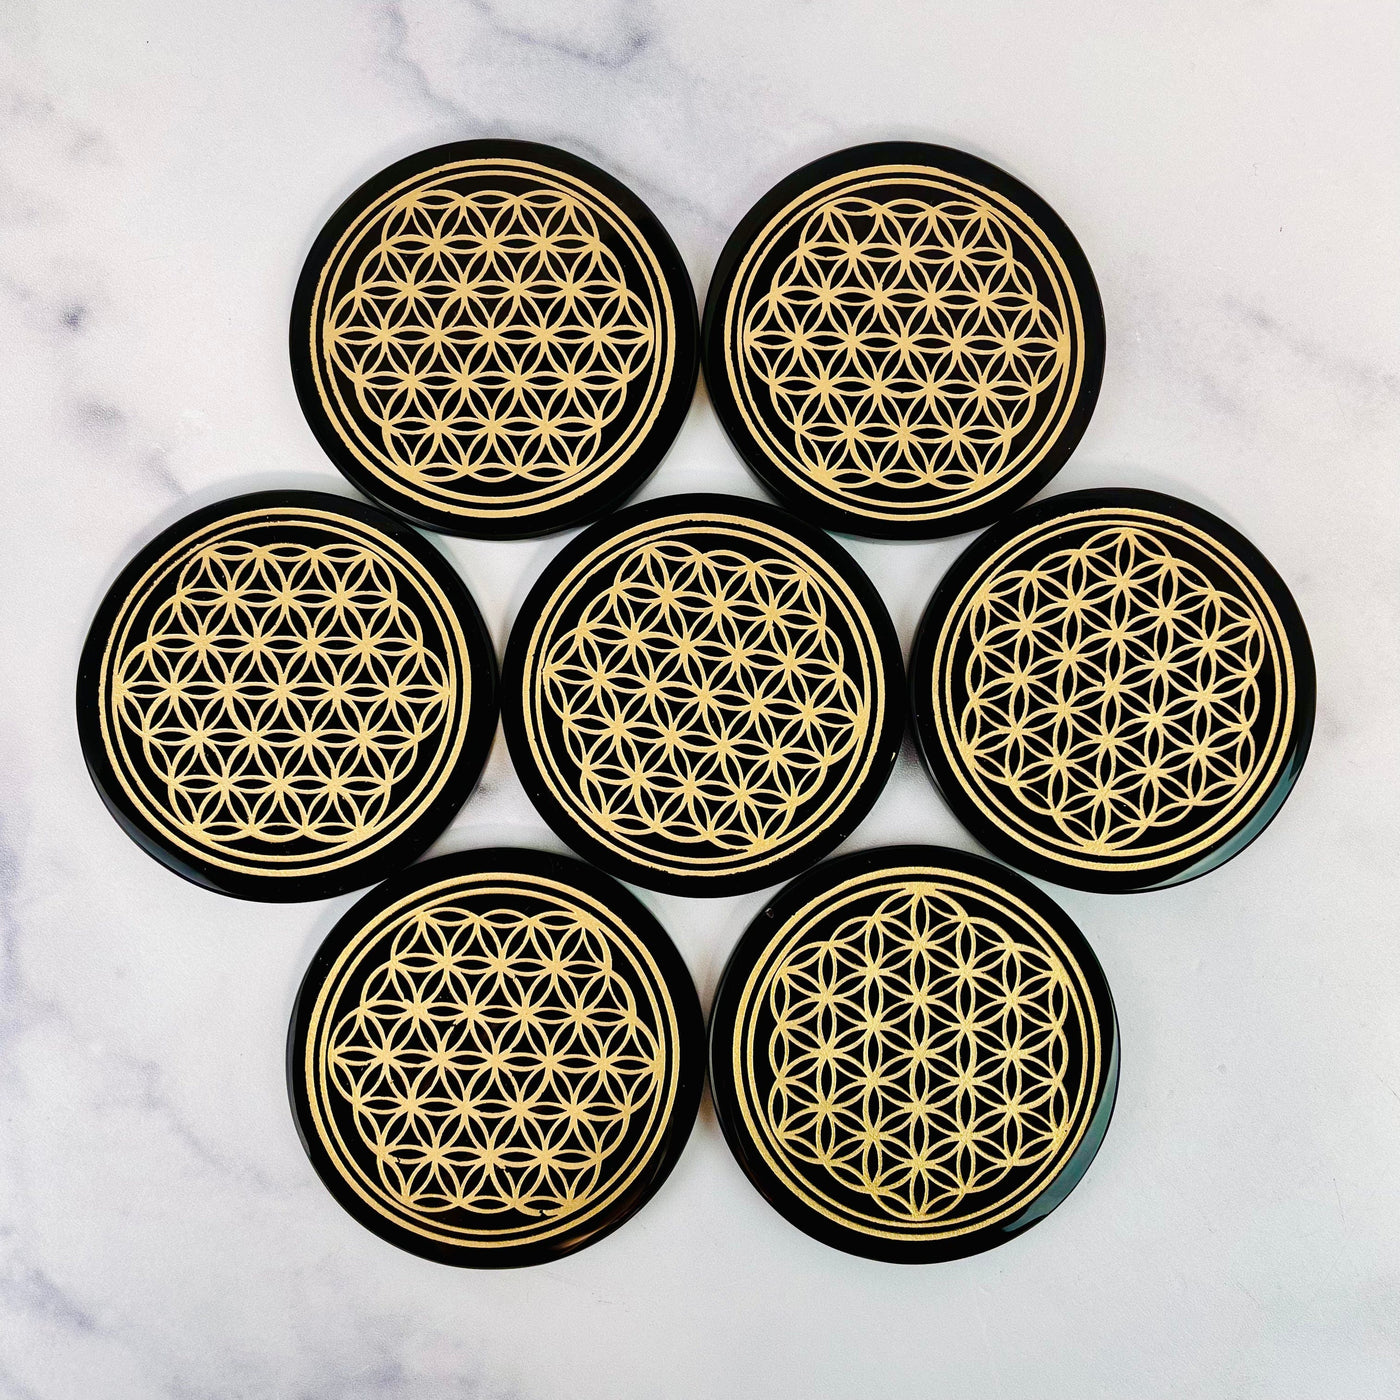 Black Obsidian Coasters laid out on a marble surface in a flower shape.